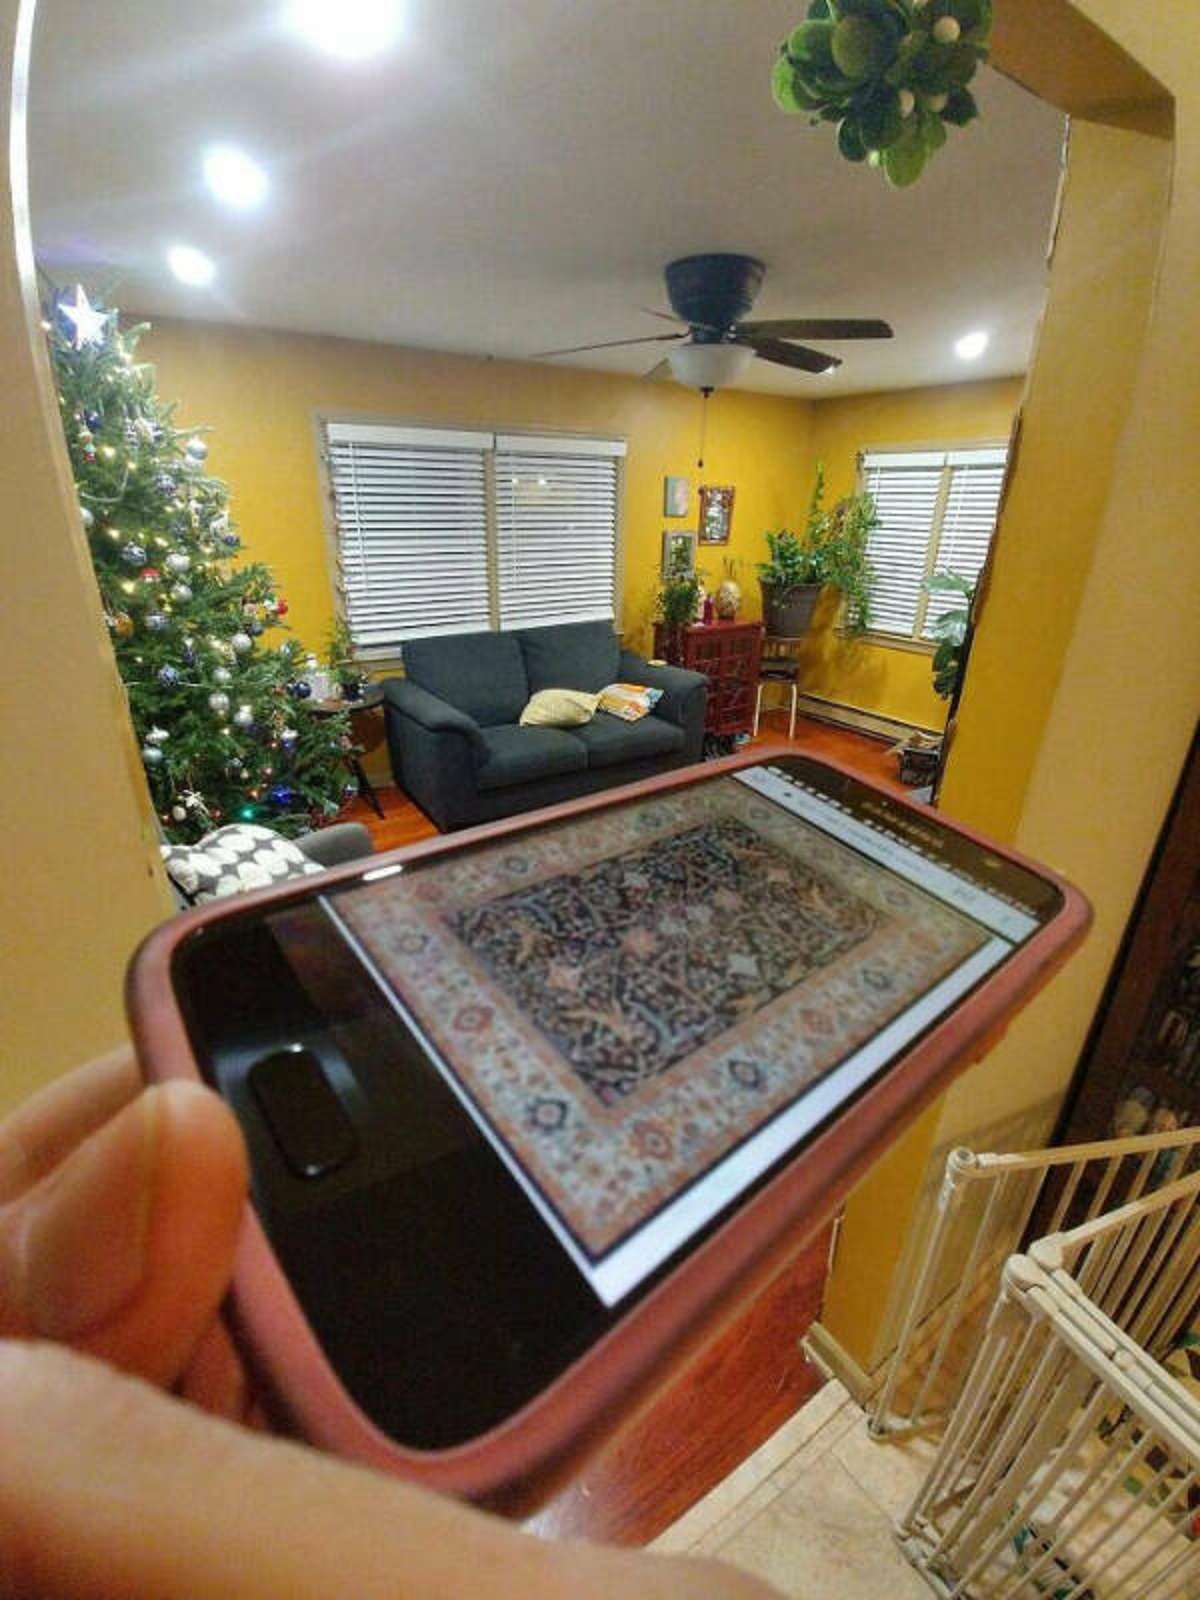 “Wanted to see how some rugs would look in our living room but too lazy to photoshop it”